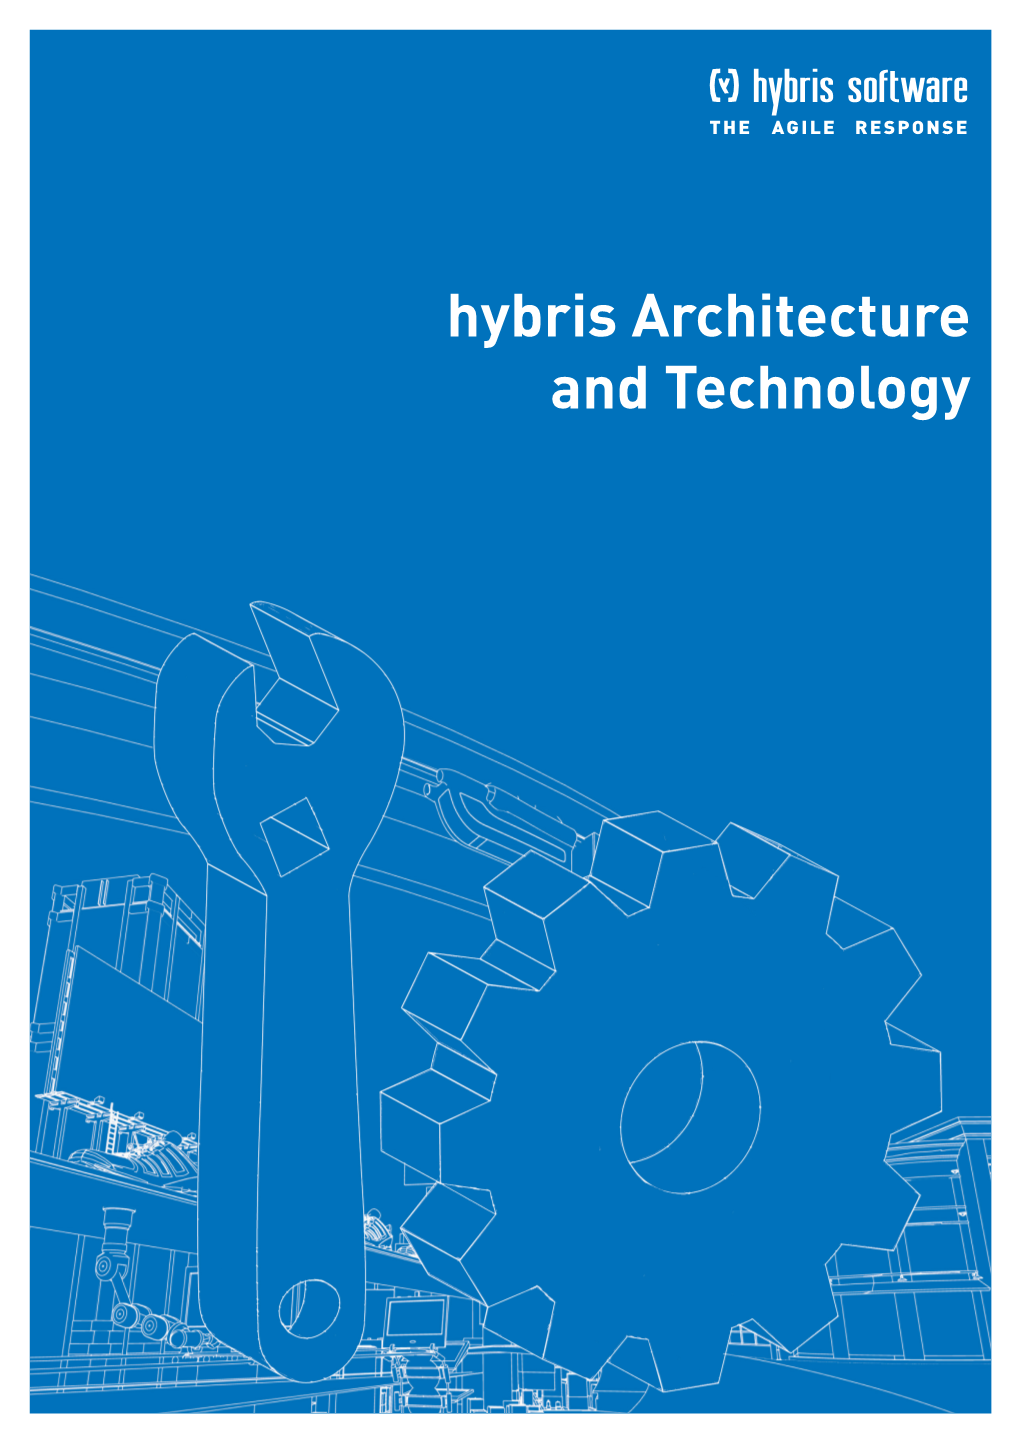 Hybris Architecture and Technology Abstract